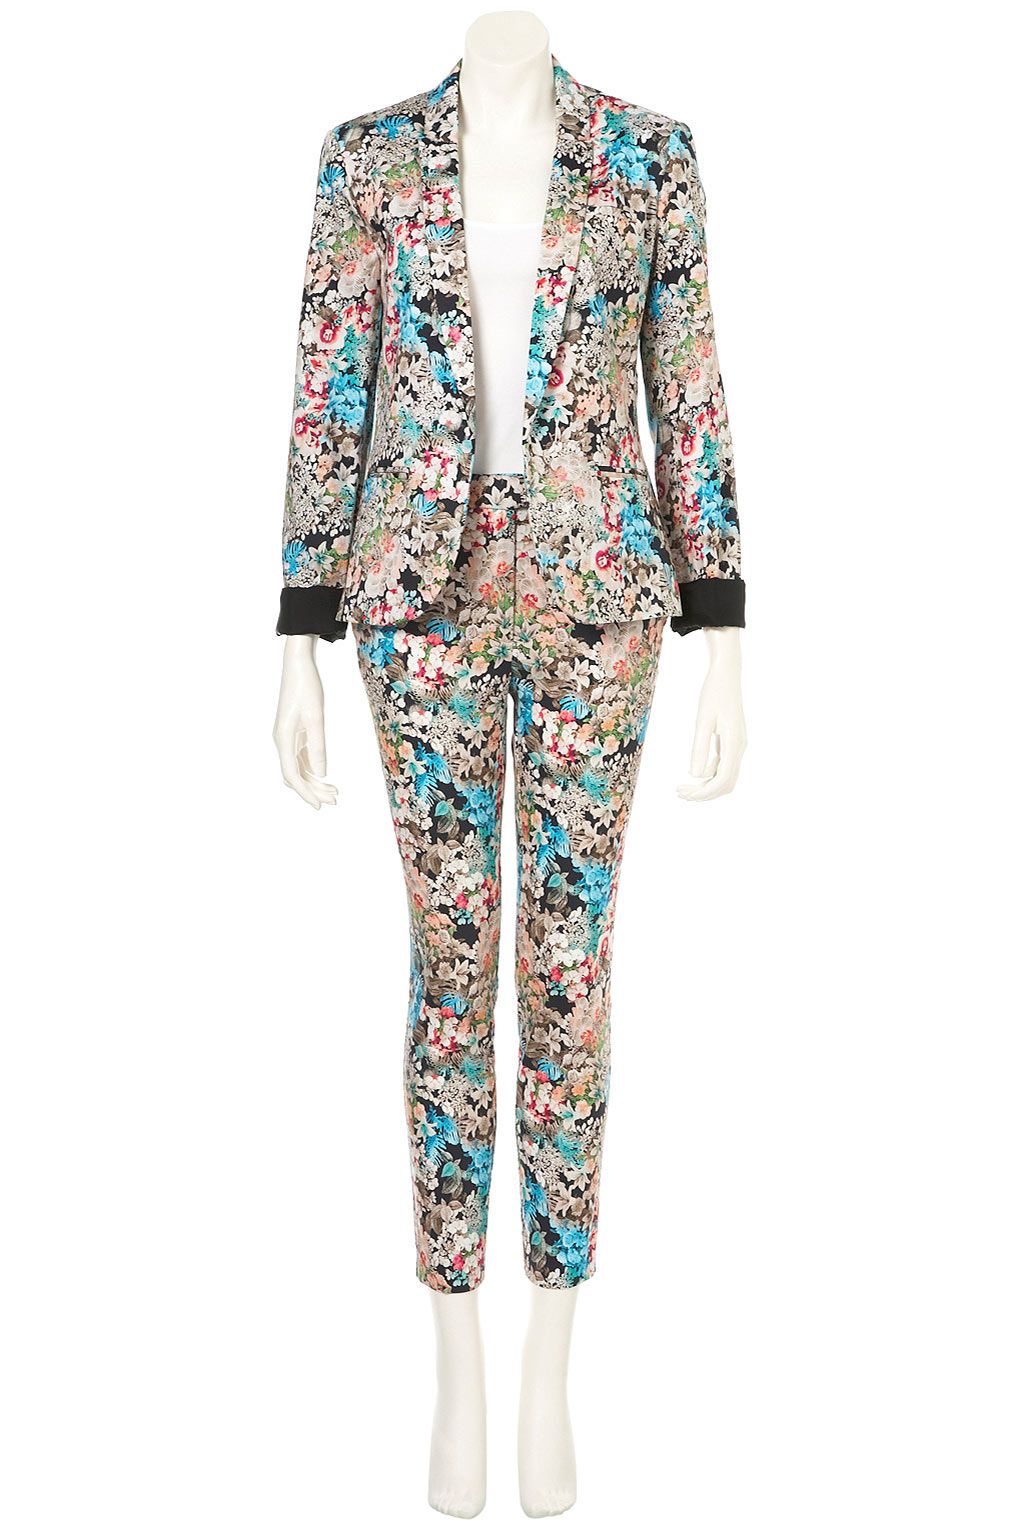 Berenice Floral Suit Jacket And Trouser Set Size FR 40 (UK 12) - Dress  Cheshire | Preloved Designer Fashion | Boutique in Cheshire